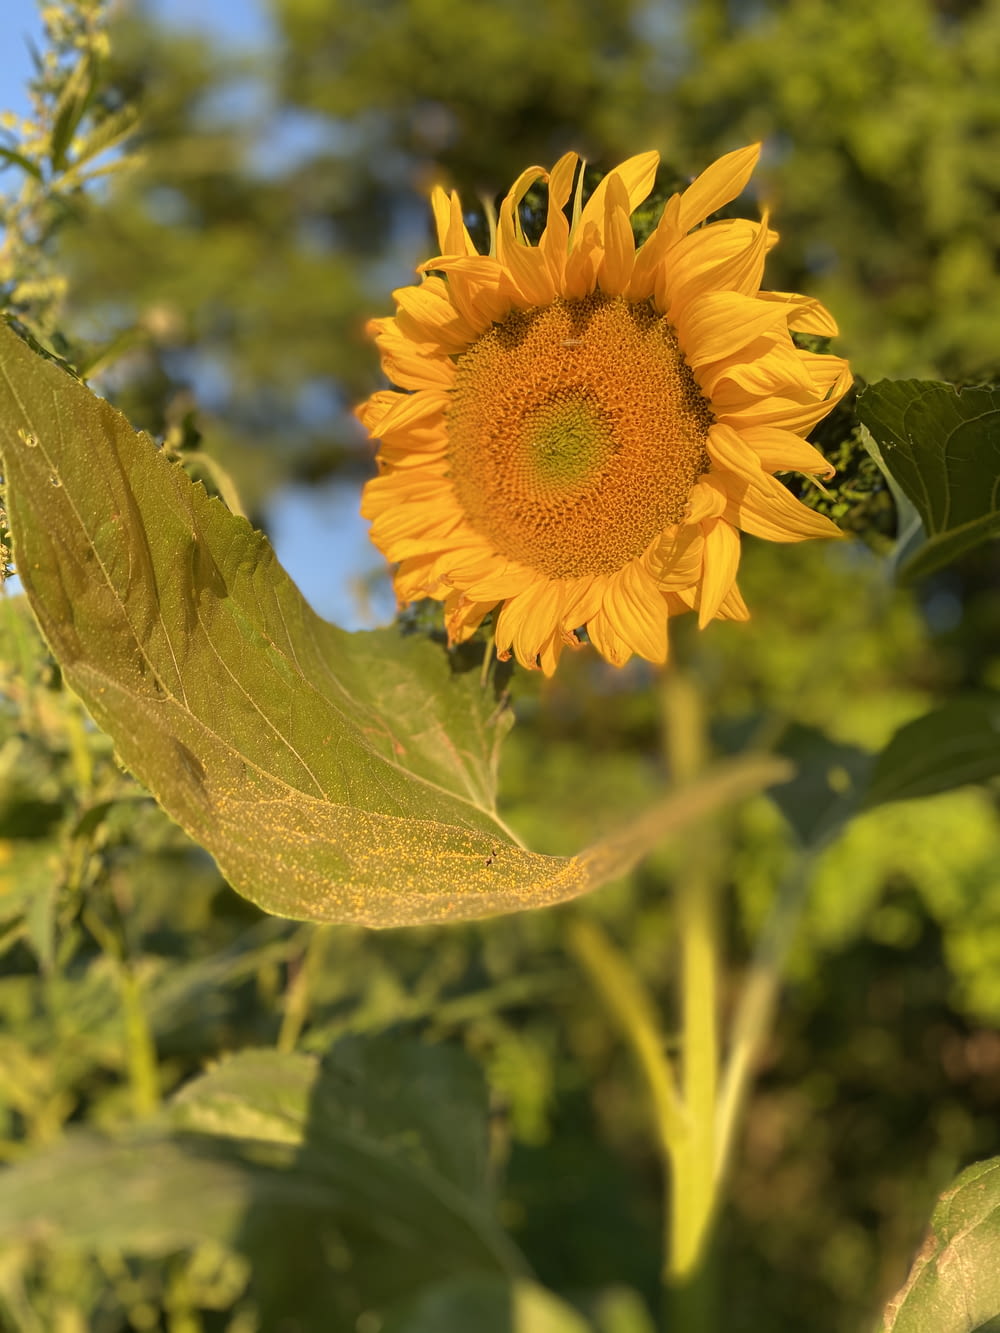 yellow sunflower in bloom during daytime